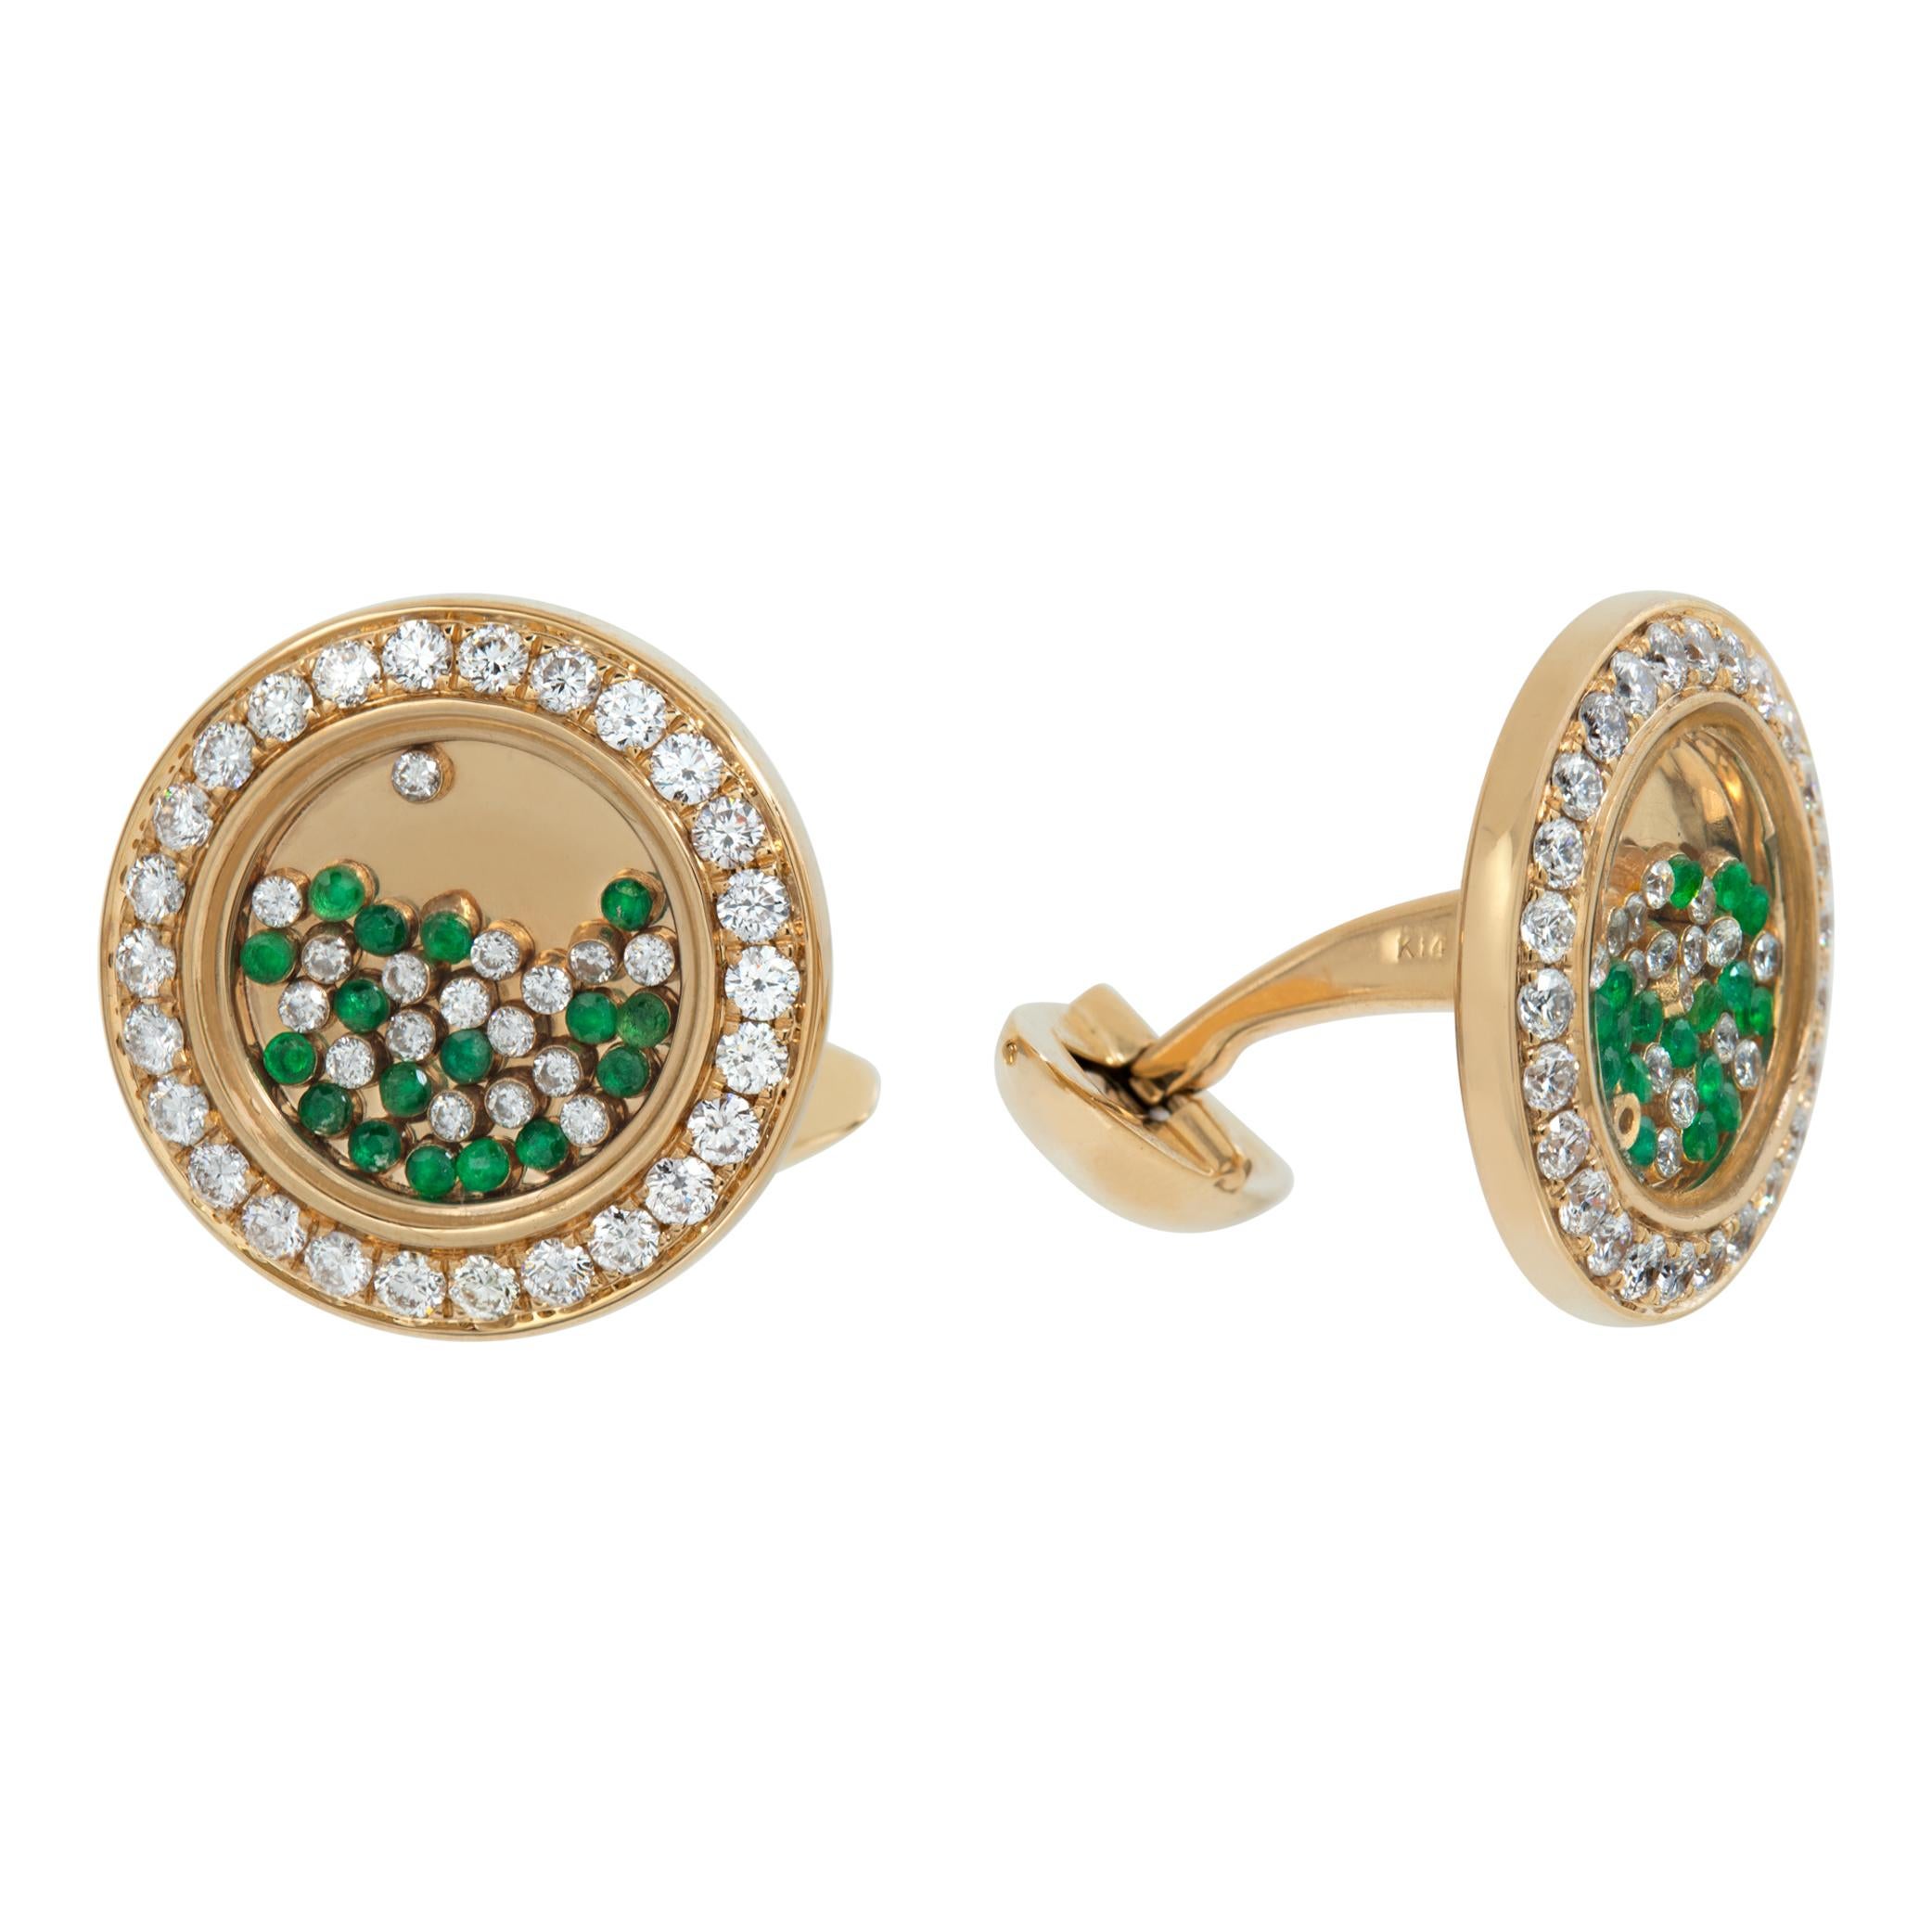 Cufflinks with moving Emerald & diamonds under glass in 14k yellow gold. Round brilliant cut diamonds total approx. weight: 1.80 carat, estimate G-H color, VS-SI clarity. Round brilliant cut Emeralds total approx. weight: 0.46 carat. Diameter: 20mm.